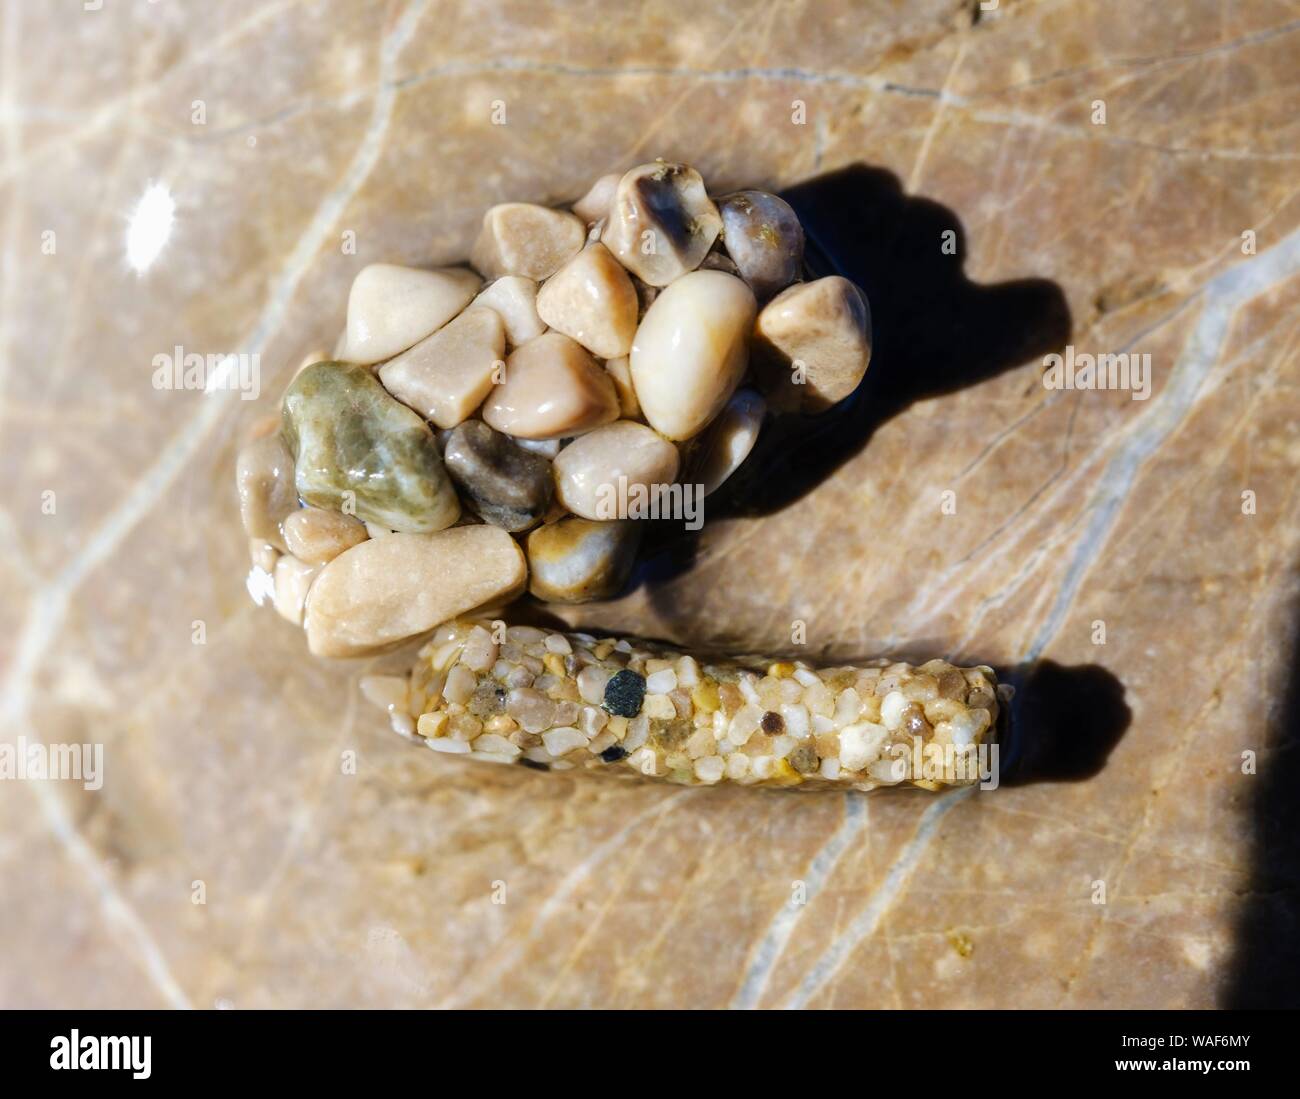 Doll quiver made of small stones and larva by Caddisfly (Trichoptera), protected by small stones, on stone in Isar, Bavaria, Germany Stock Photo